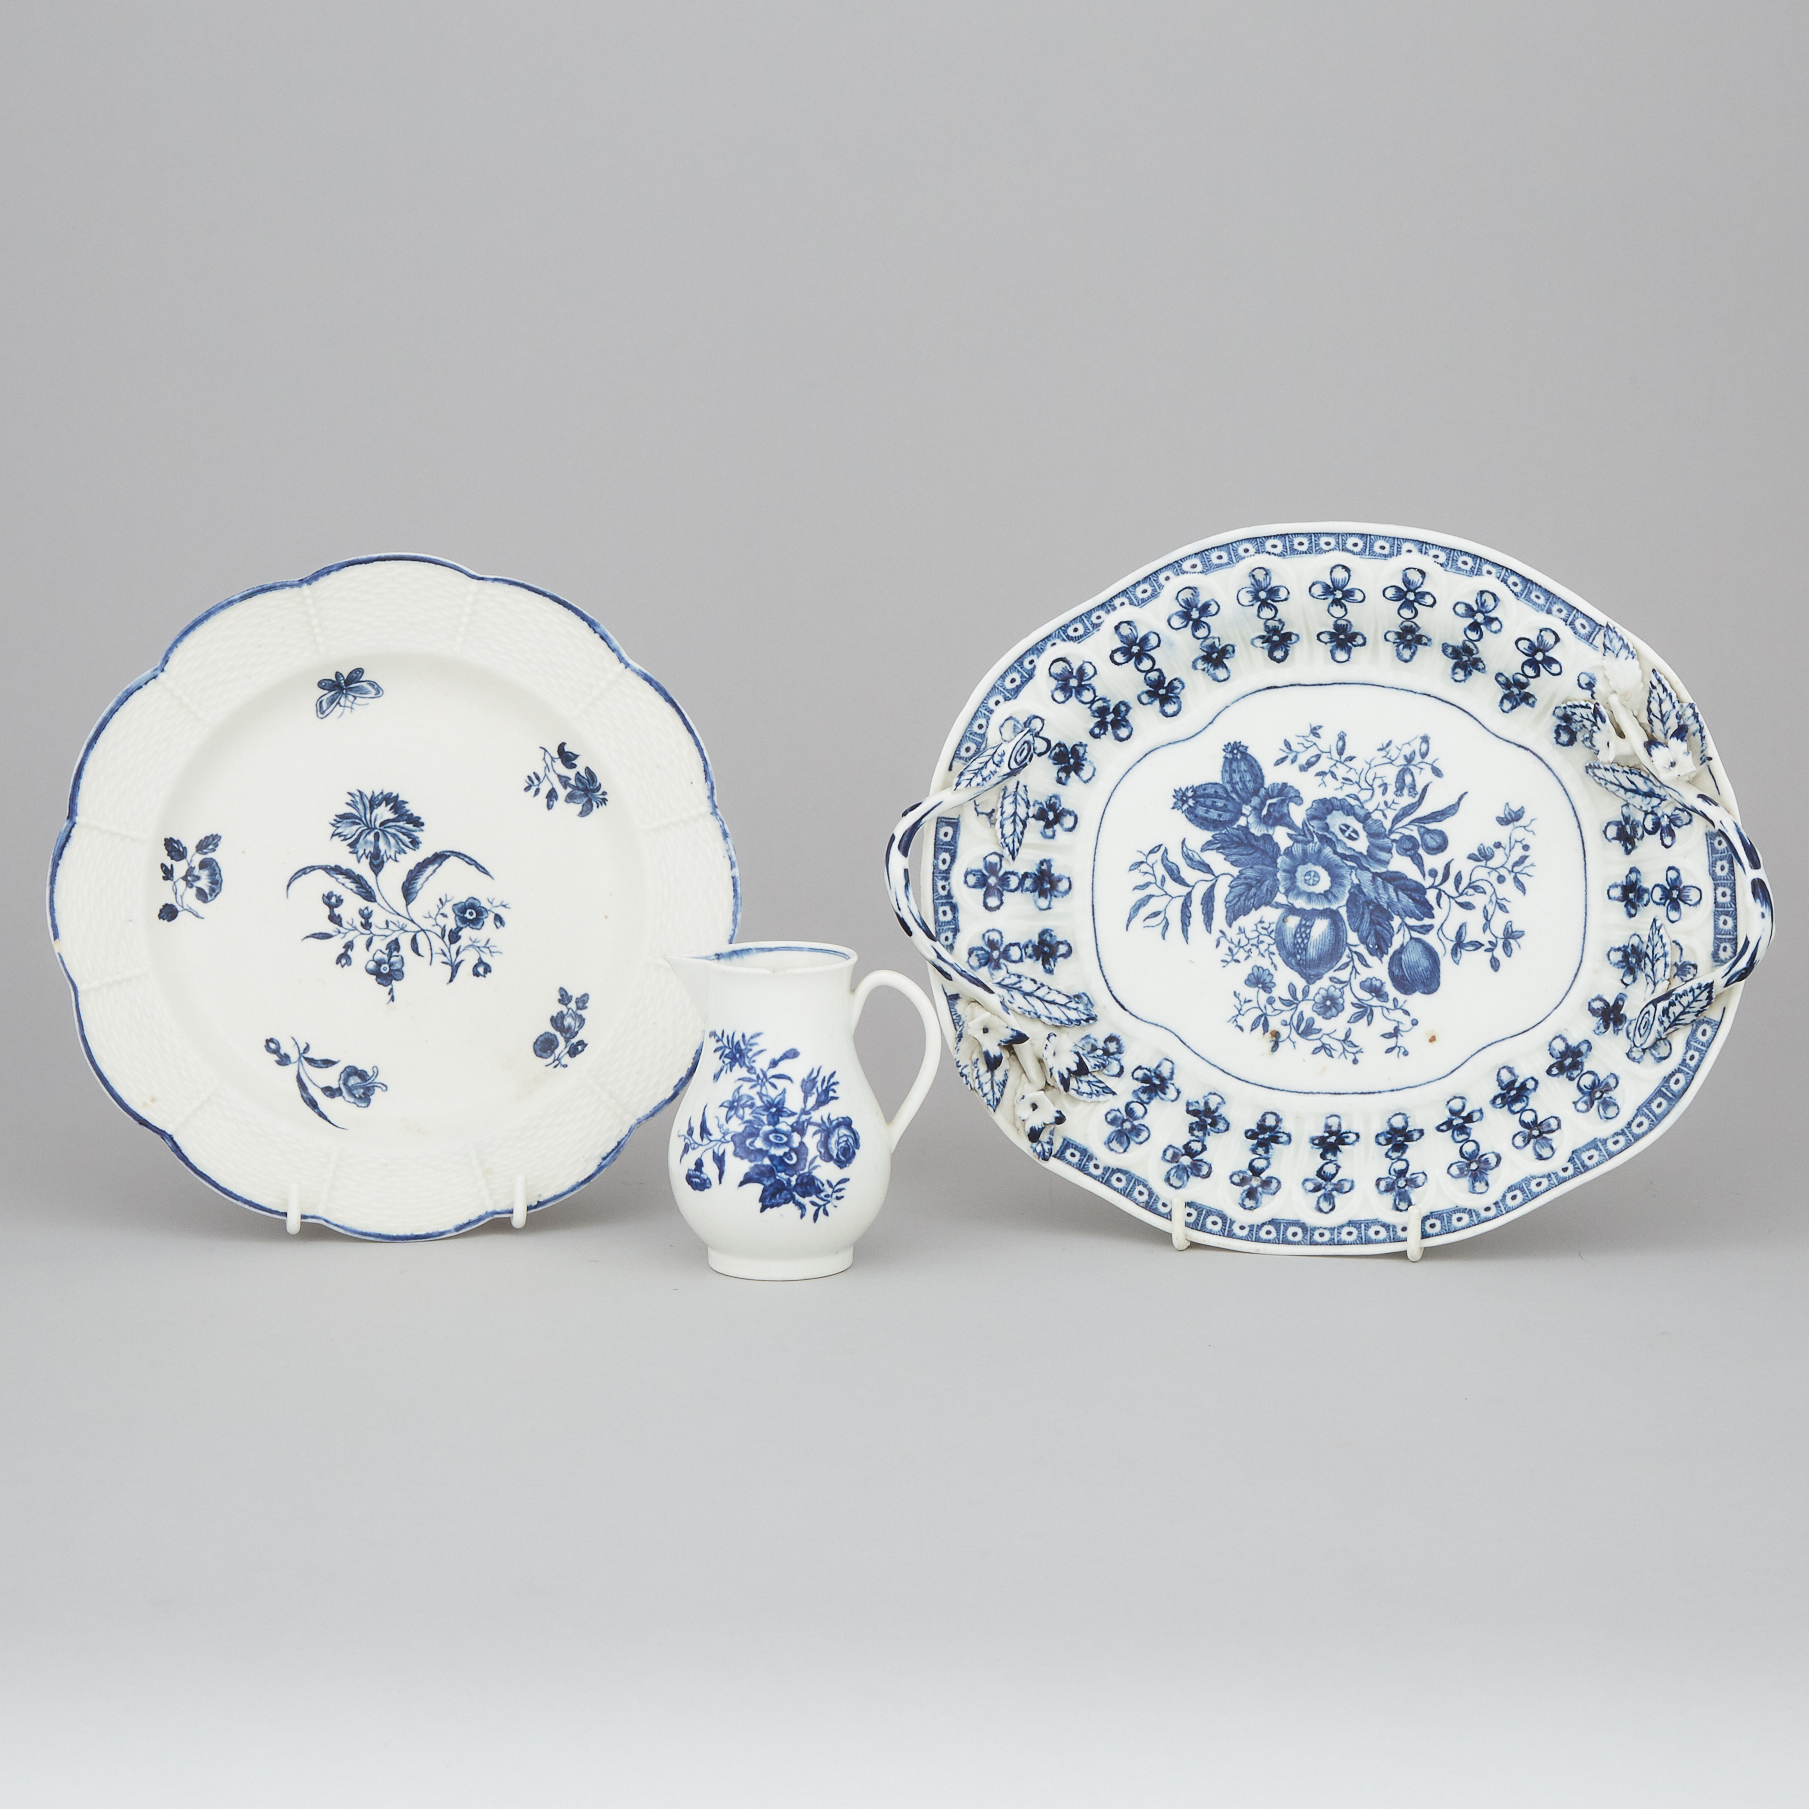 Two Worcester Blue and White Printed Porcelain Dishes and a Cream Jug, late 18th century